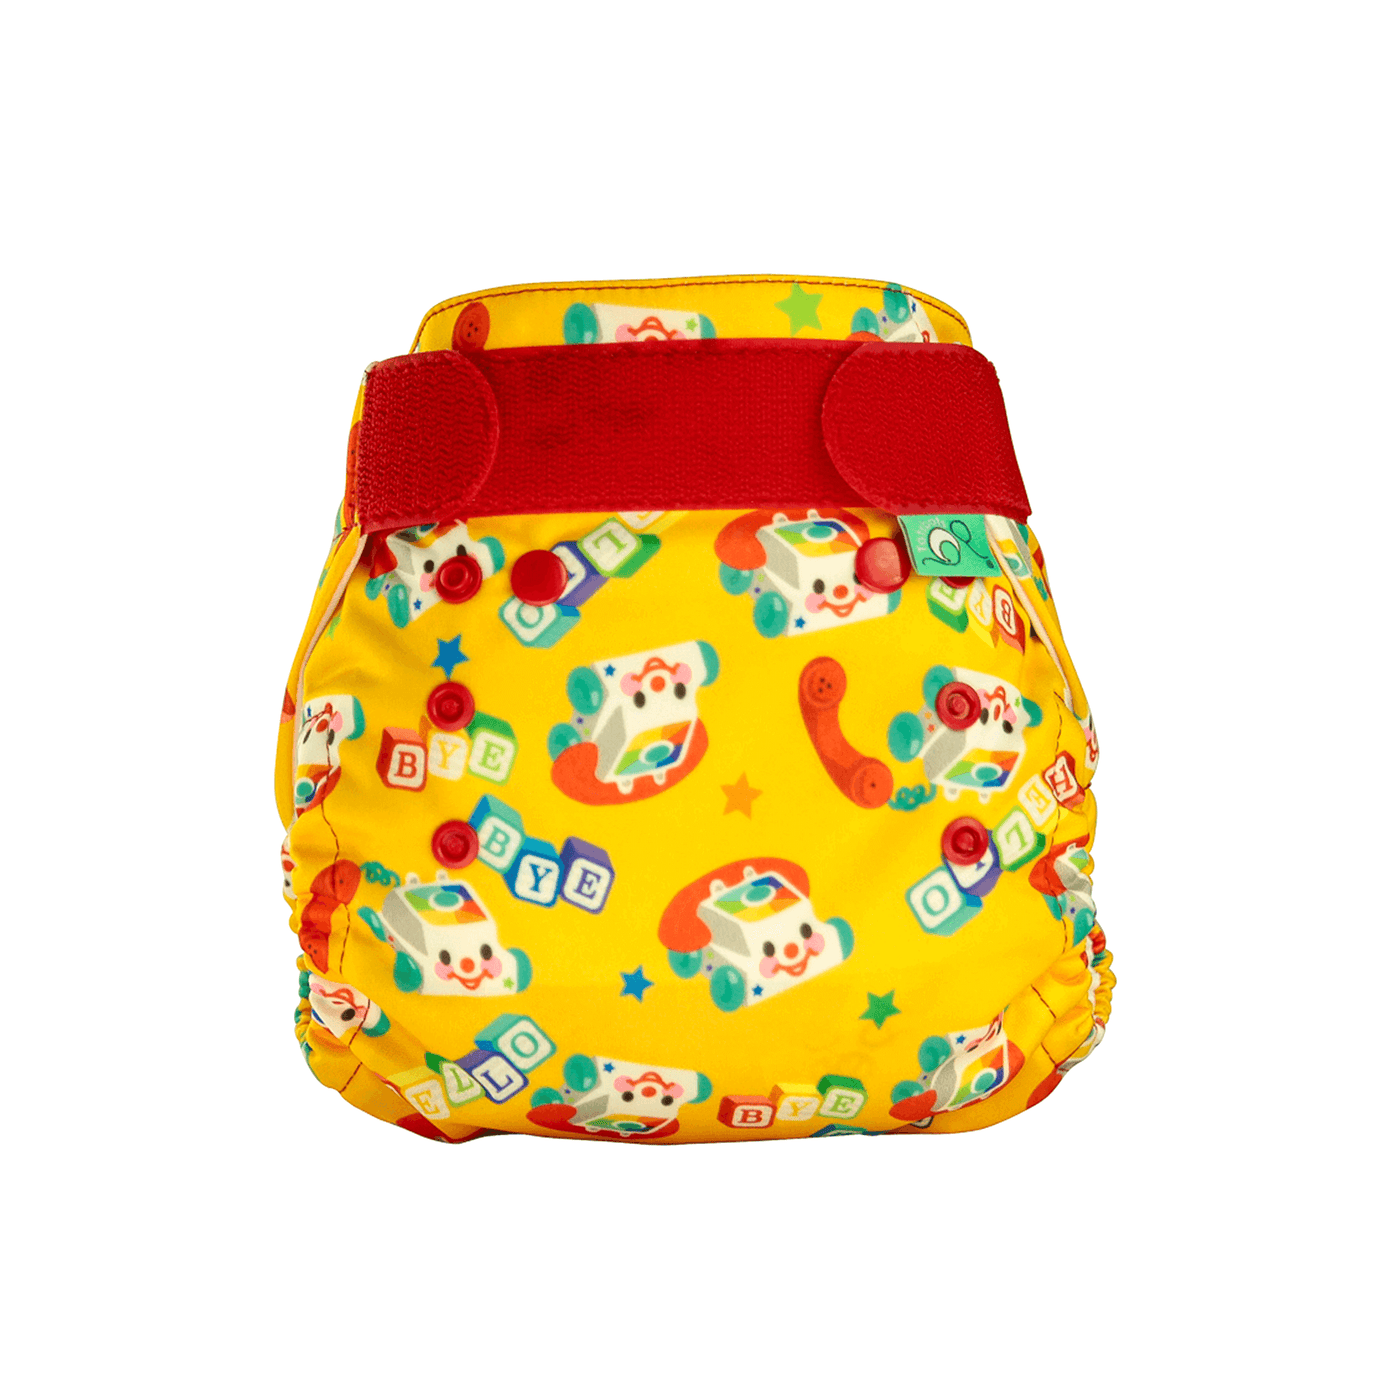 Tots Bots Bamboozle Nappy Wrap Colour: Chatterbots Size: Size 1 (6-18lbs) reusable nappies Earthlets